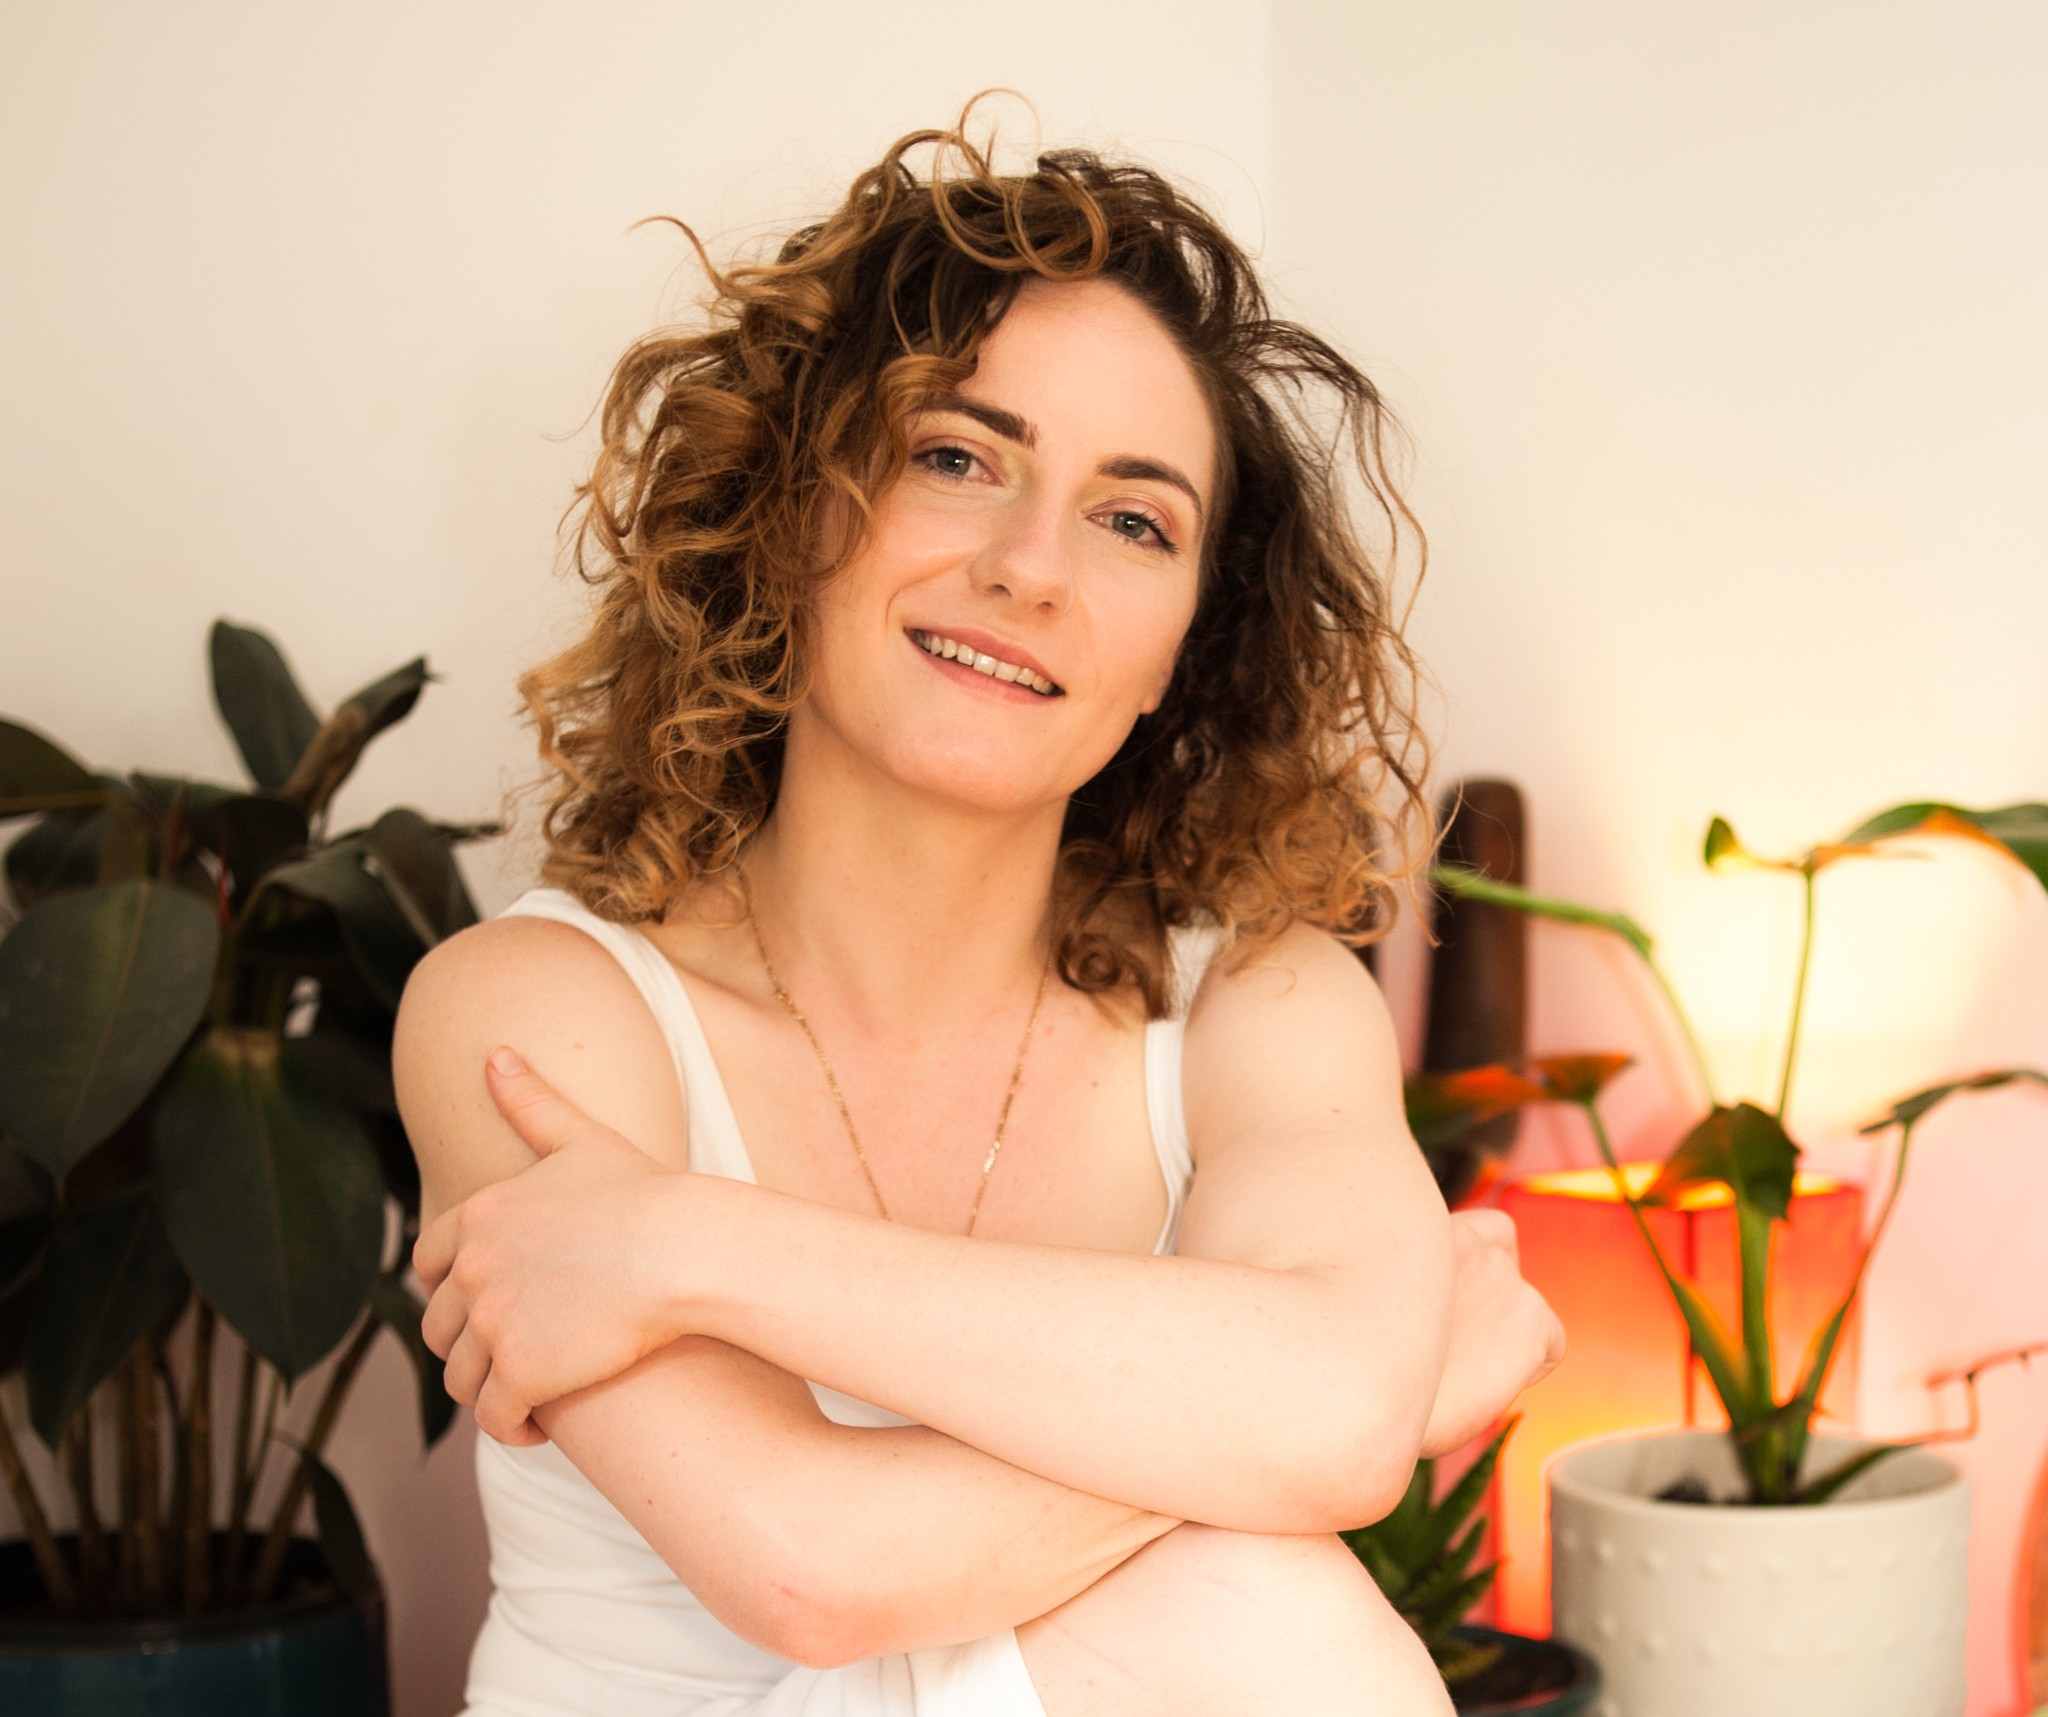 Nastassja Vujovich therapist on Natural Therapy Pages